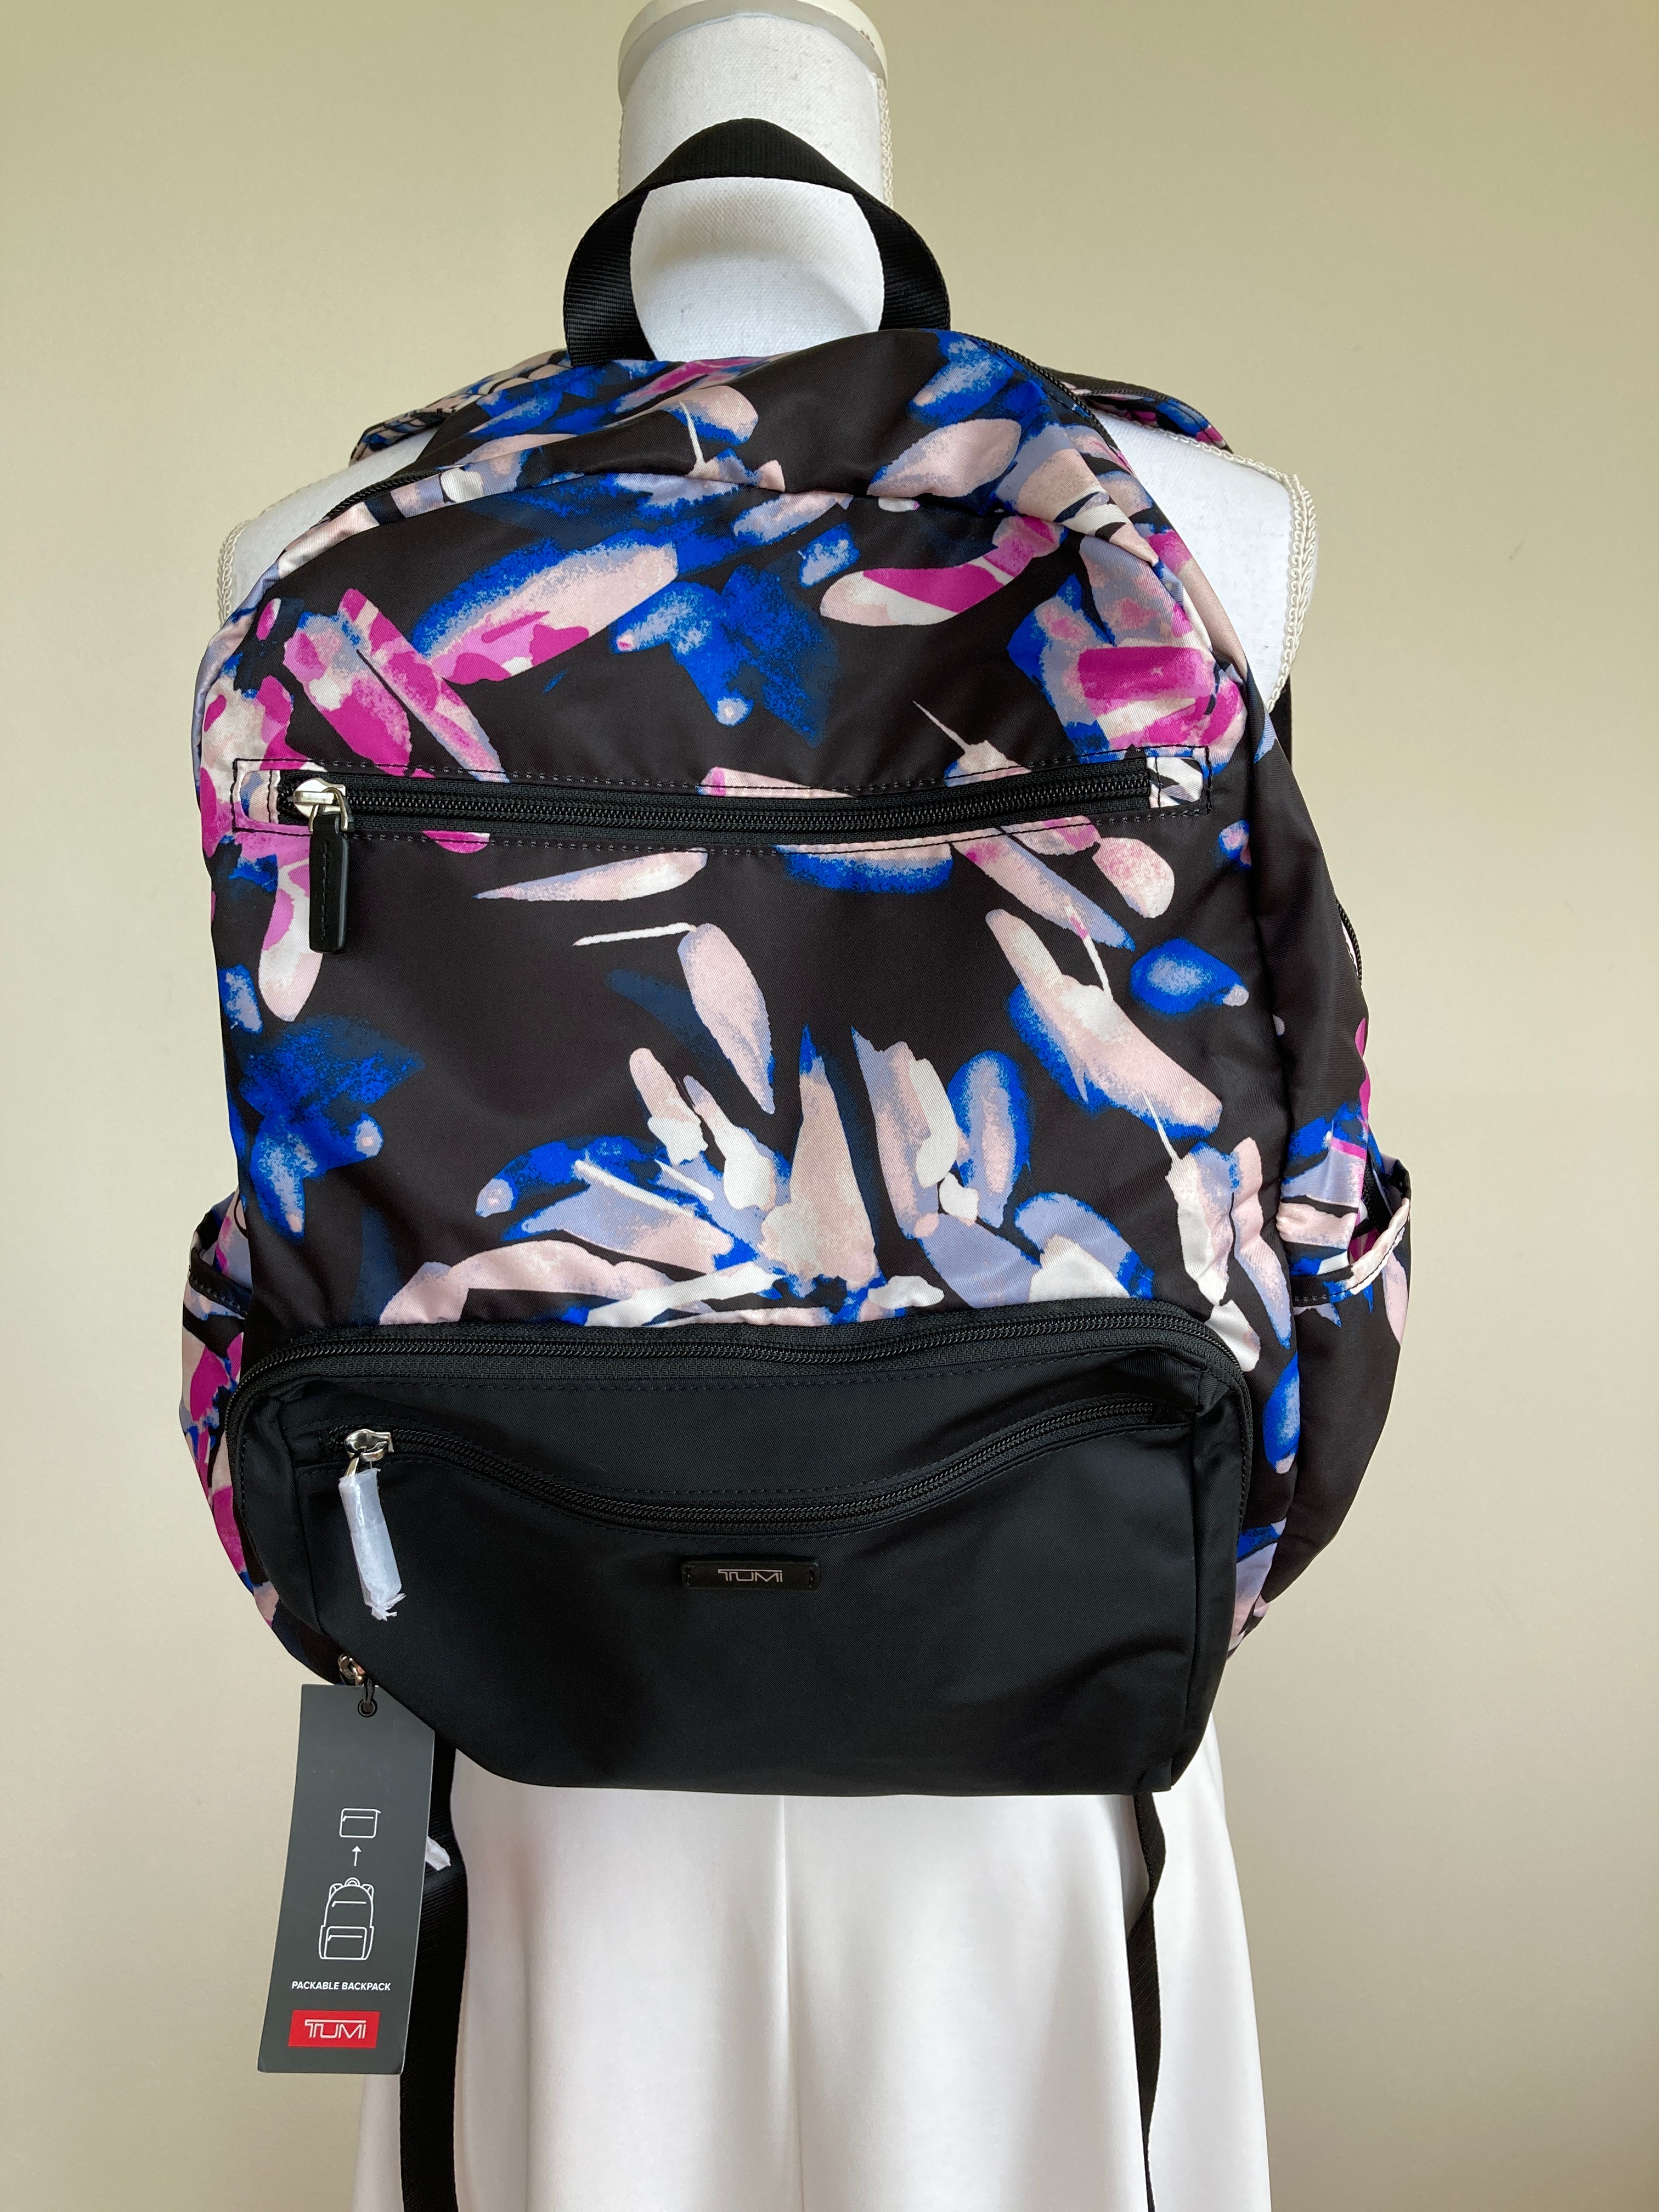 TUMI Black/Floral Packable Backpack